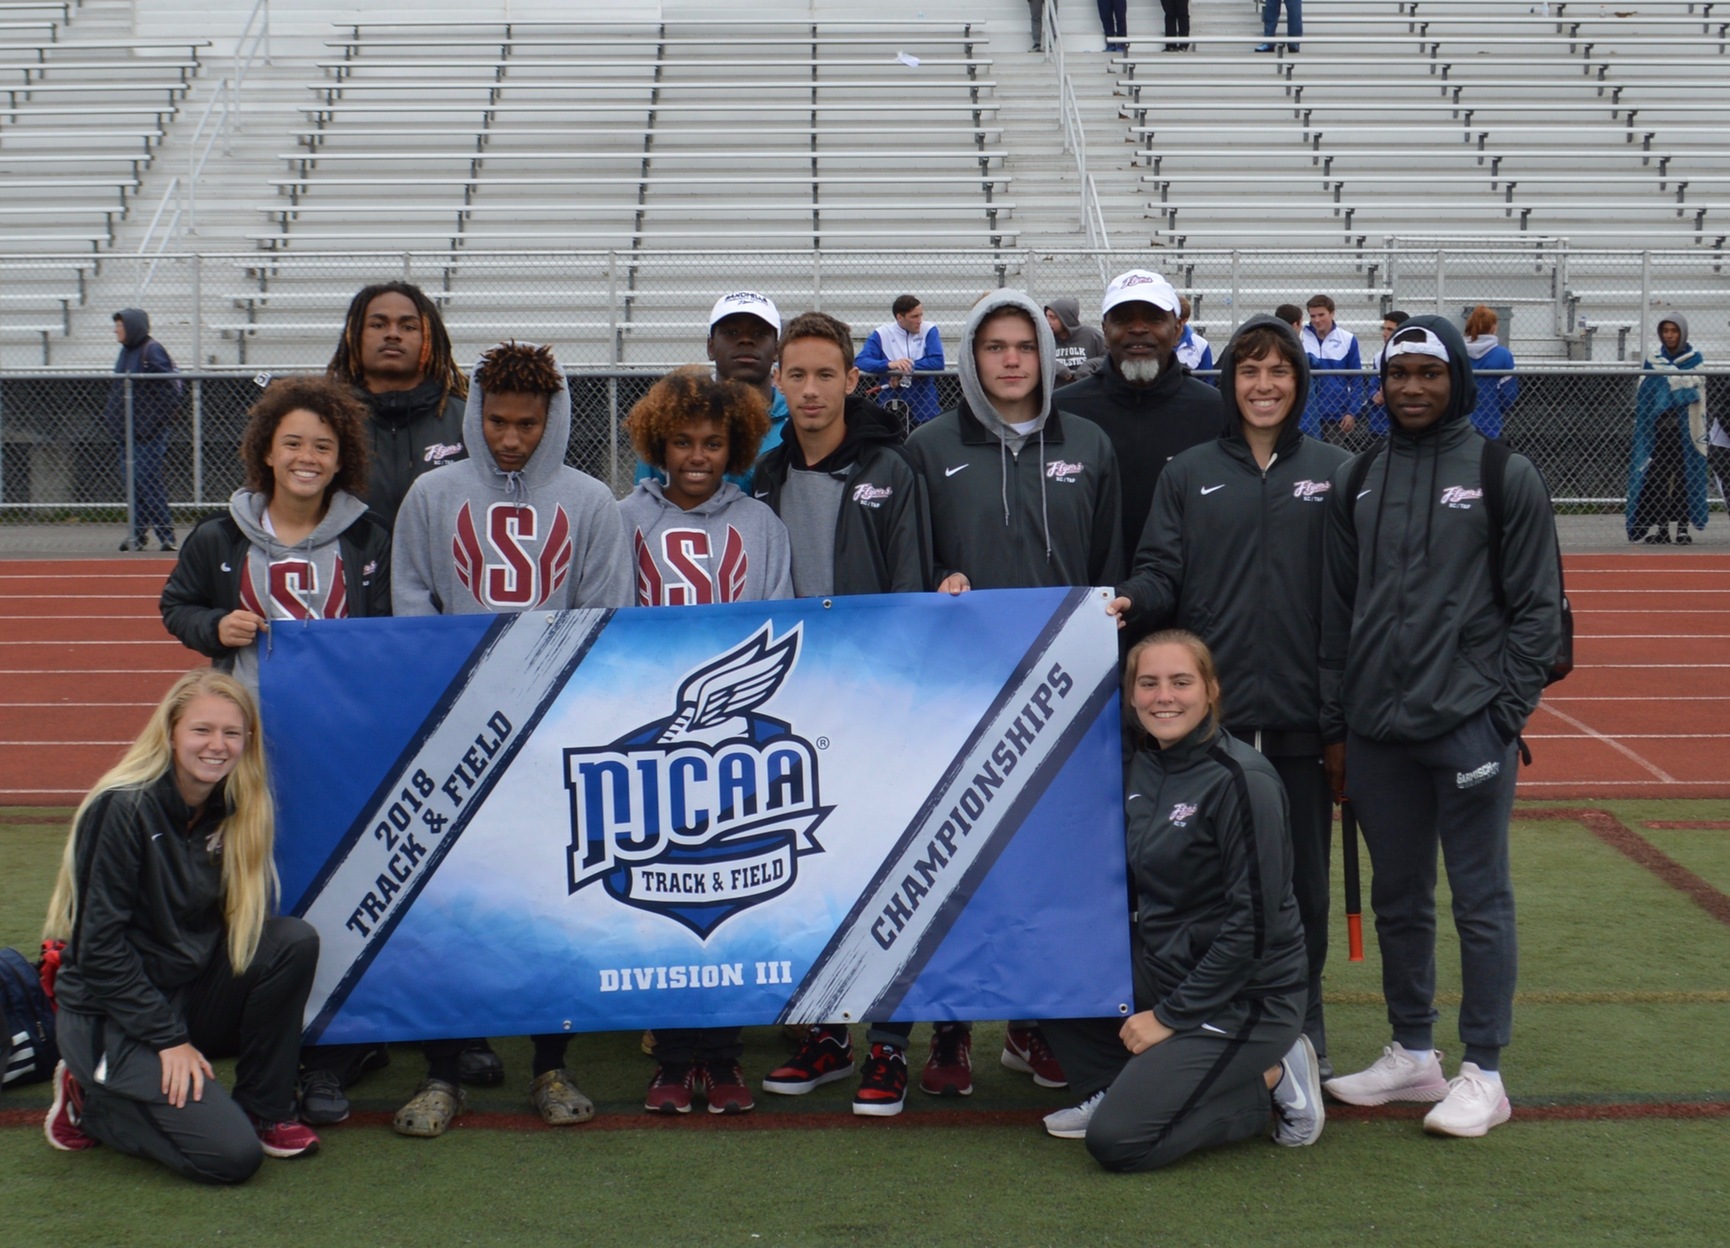 First-year Flyers Make Big Statement at NJCAA Track and Field National Championships